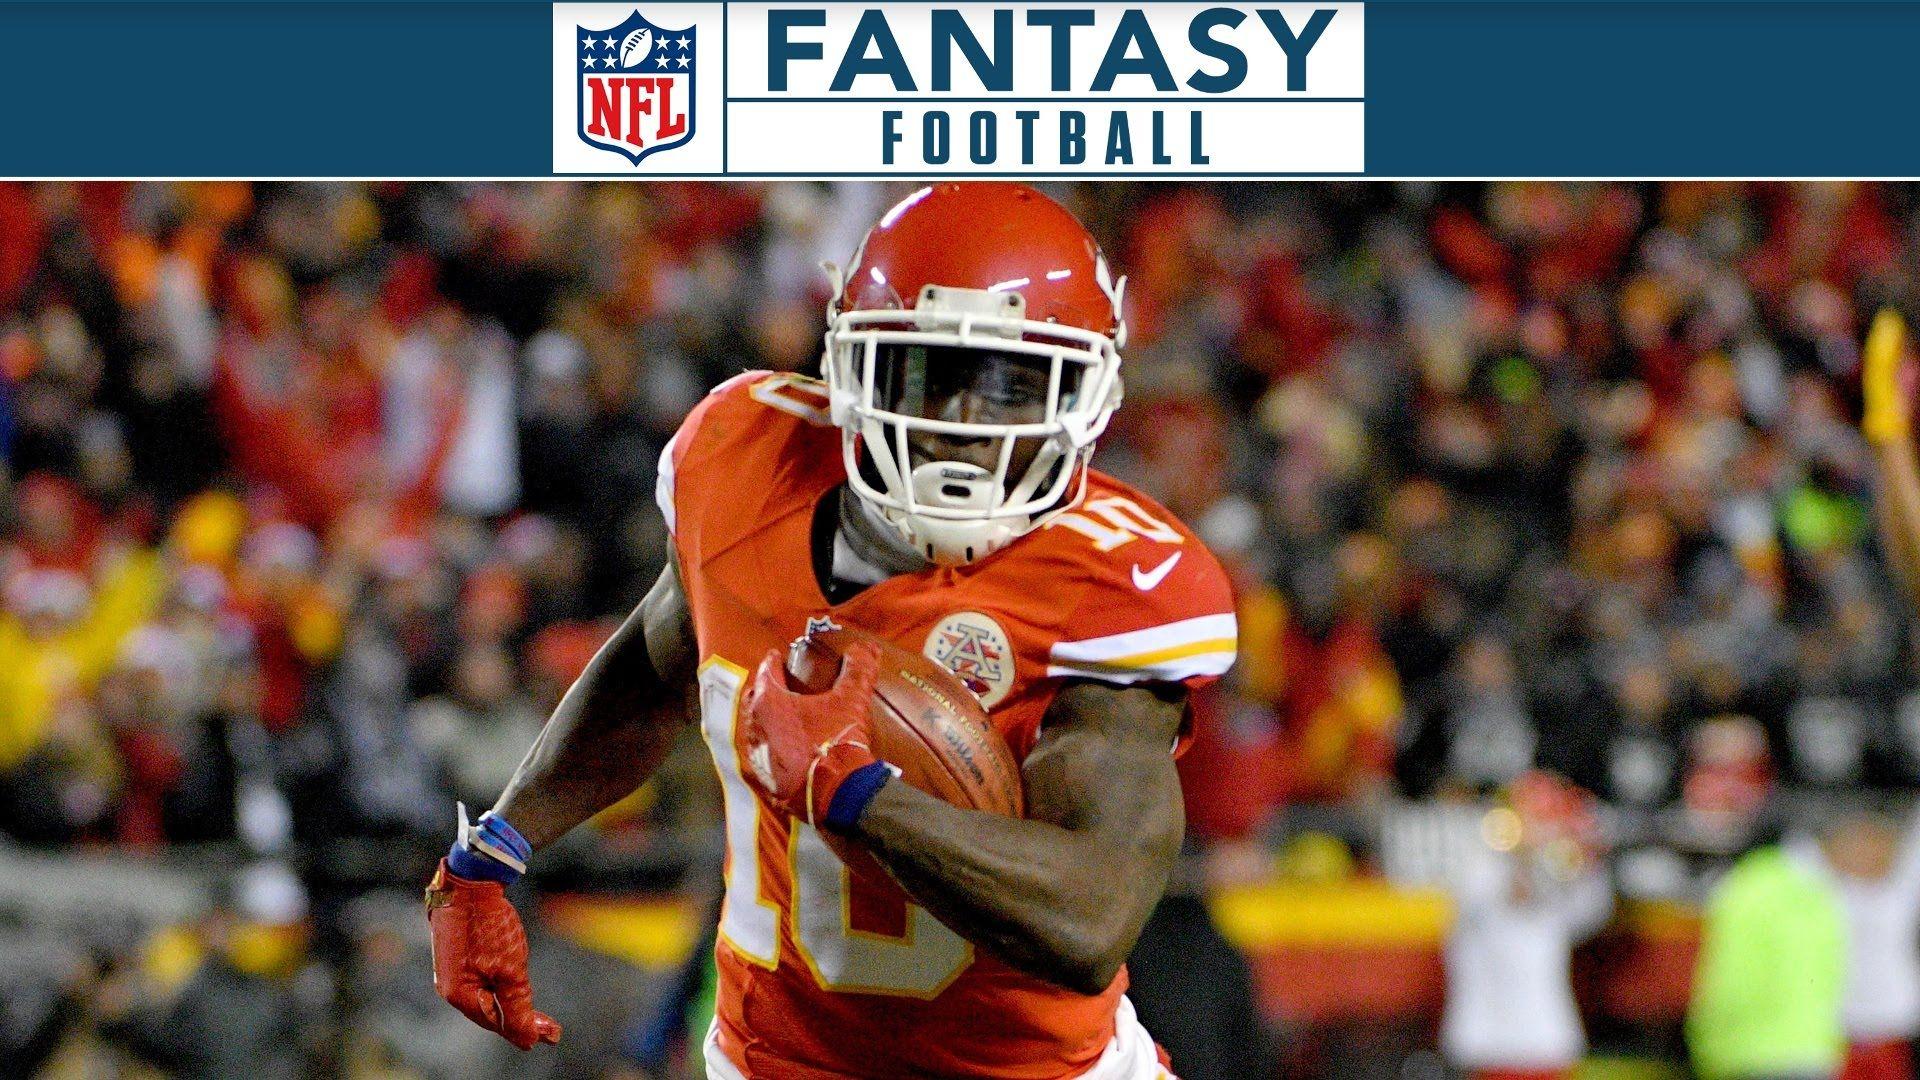 TodaySports Waiver Pickup of the Year. If you picked up Tyreek